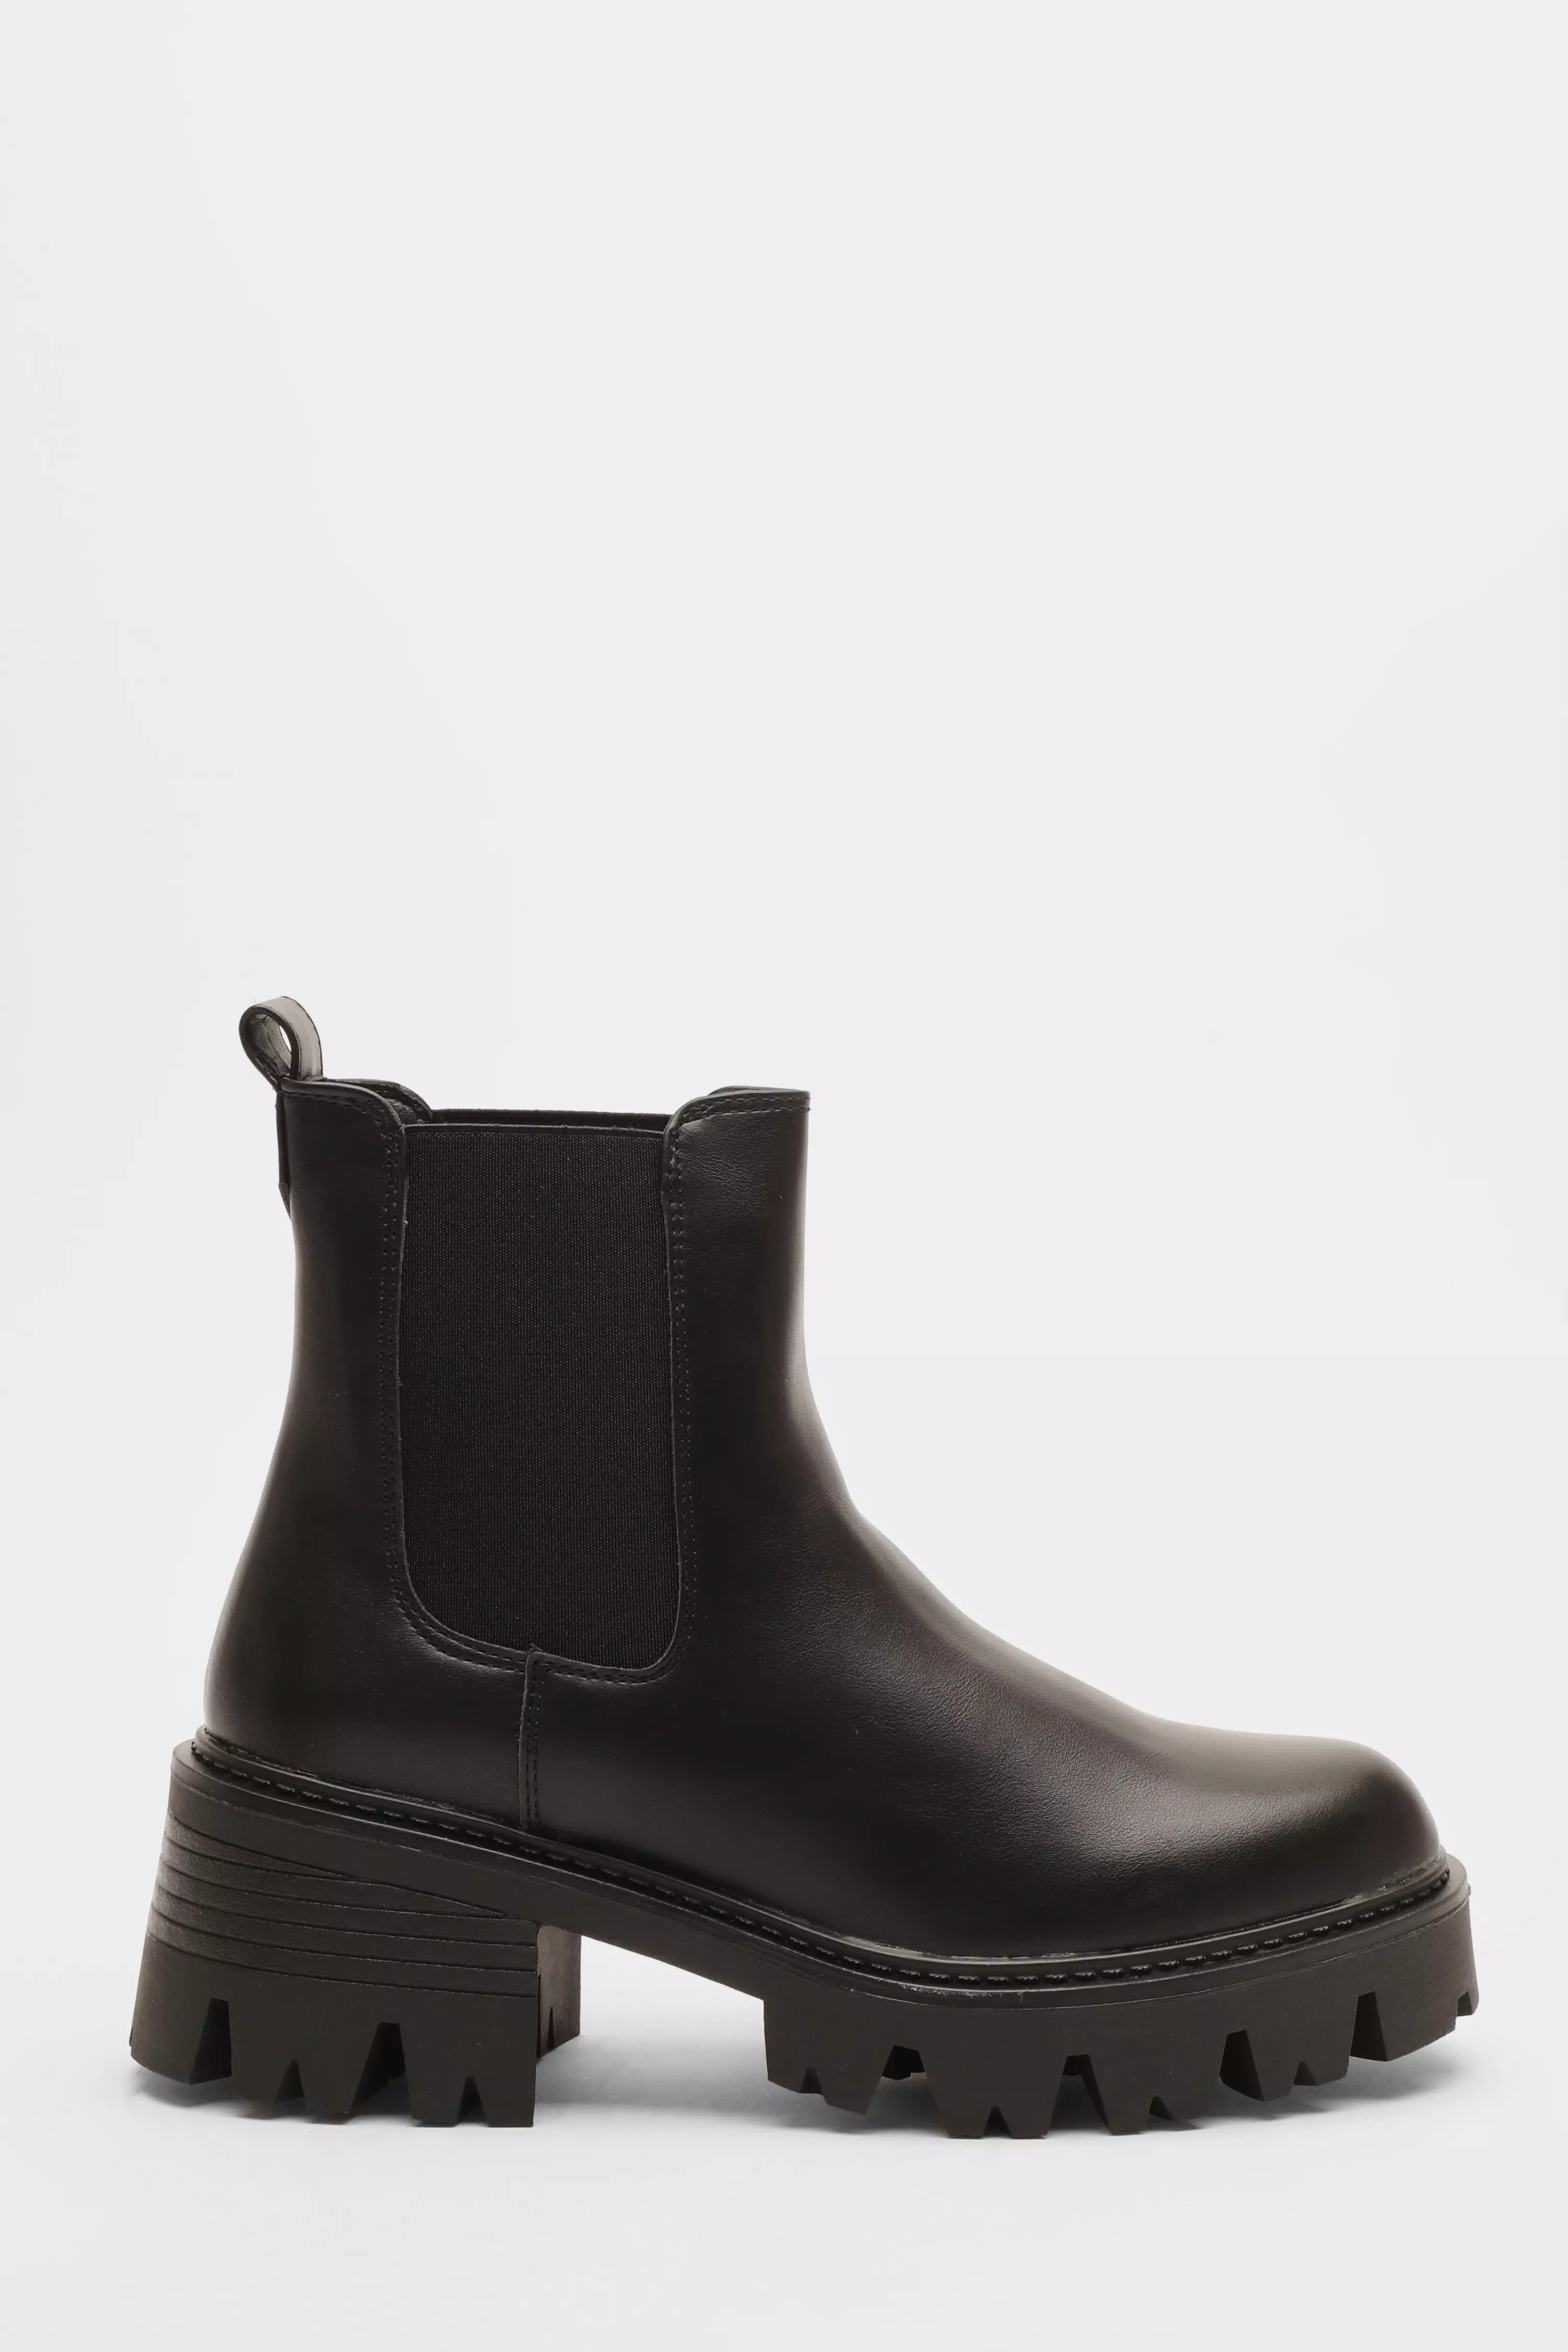 Women's Chunky Boots | Black & Chelsea Chunky Boots | QUIZ